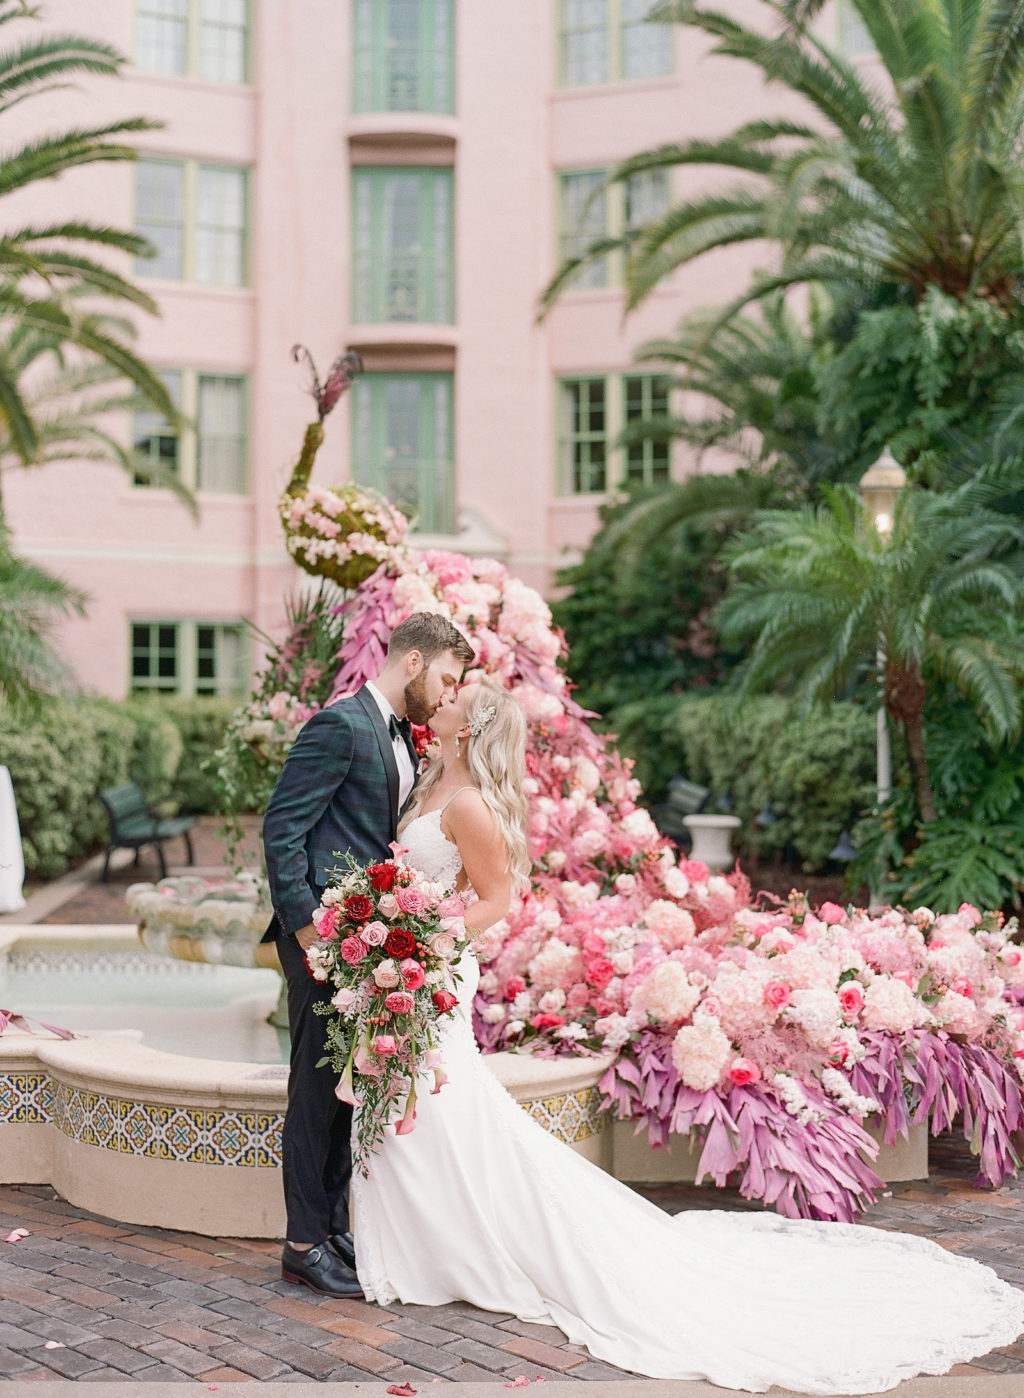 Tampa Bride and Groom Kissing Outside Courtyard by Water Fountain with Floral Peacock Statue with Pink, Red and Purple Floral Tail, Bride Holding Lush Red and Pink Roses with Greenery Floral Bouquet | St. Pete Wedding Venue The Vinoy Renaissance